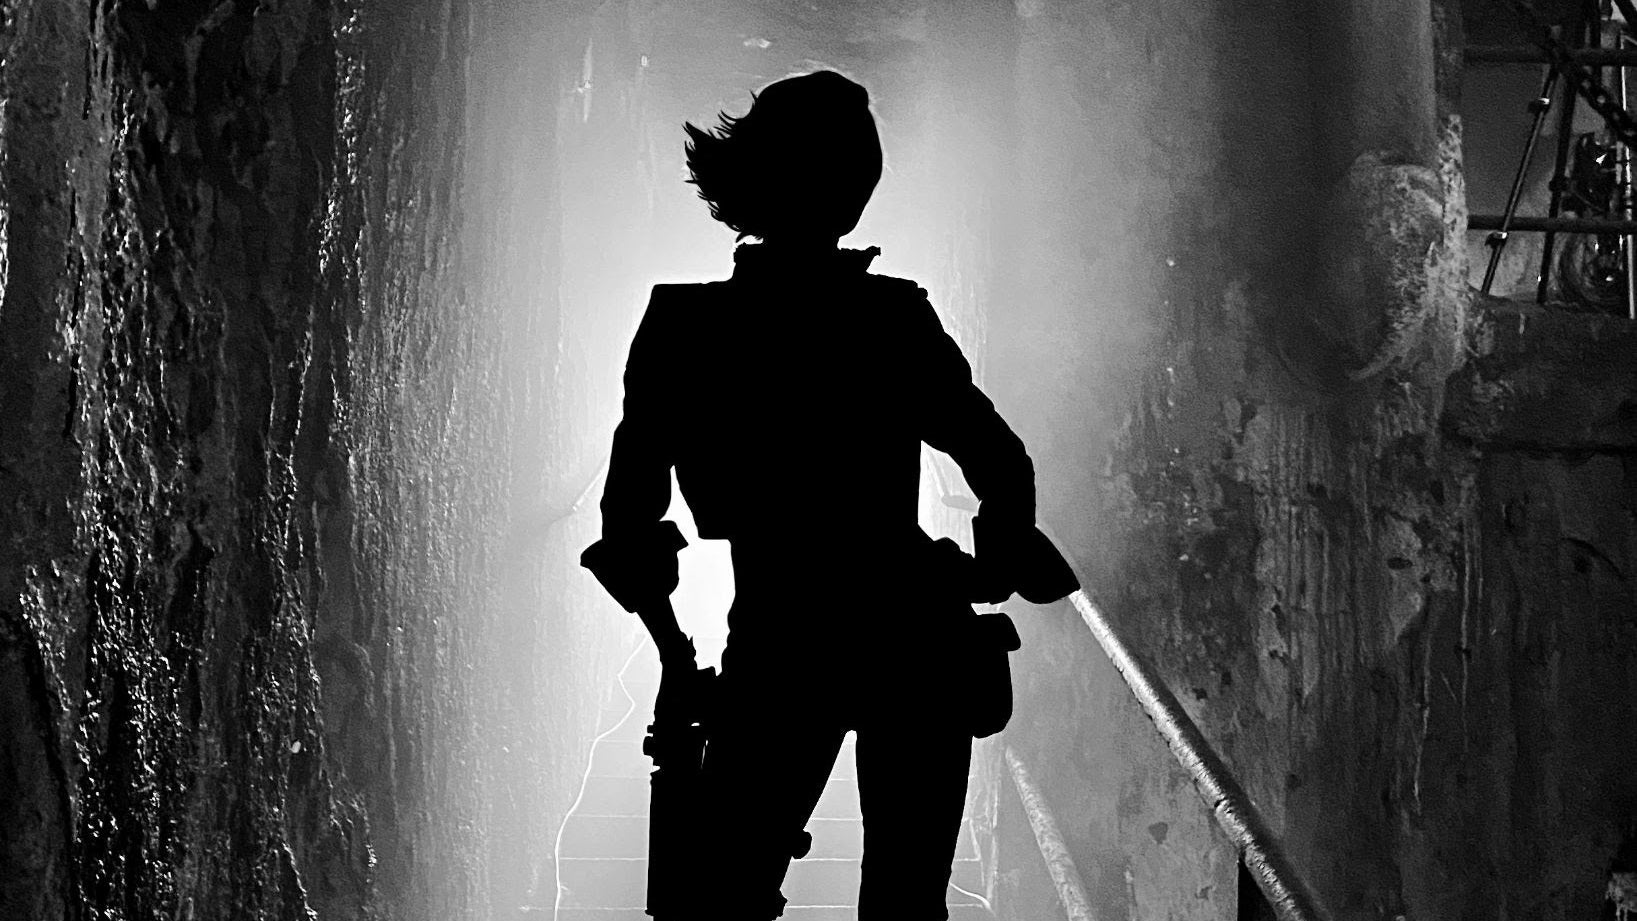 The silhouette of Cate Blanchett as Lilith in the Borderlands movie.